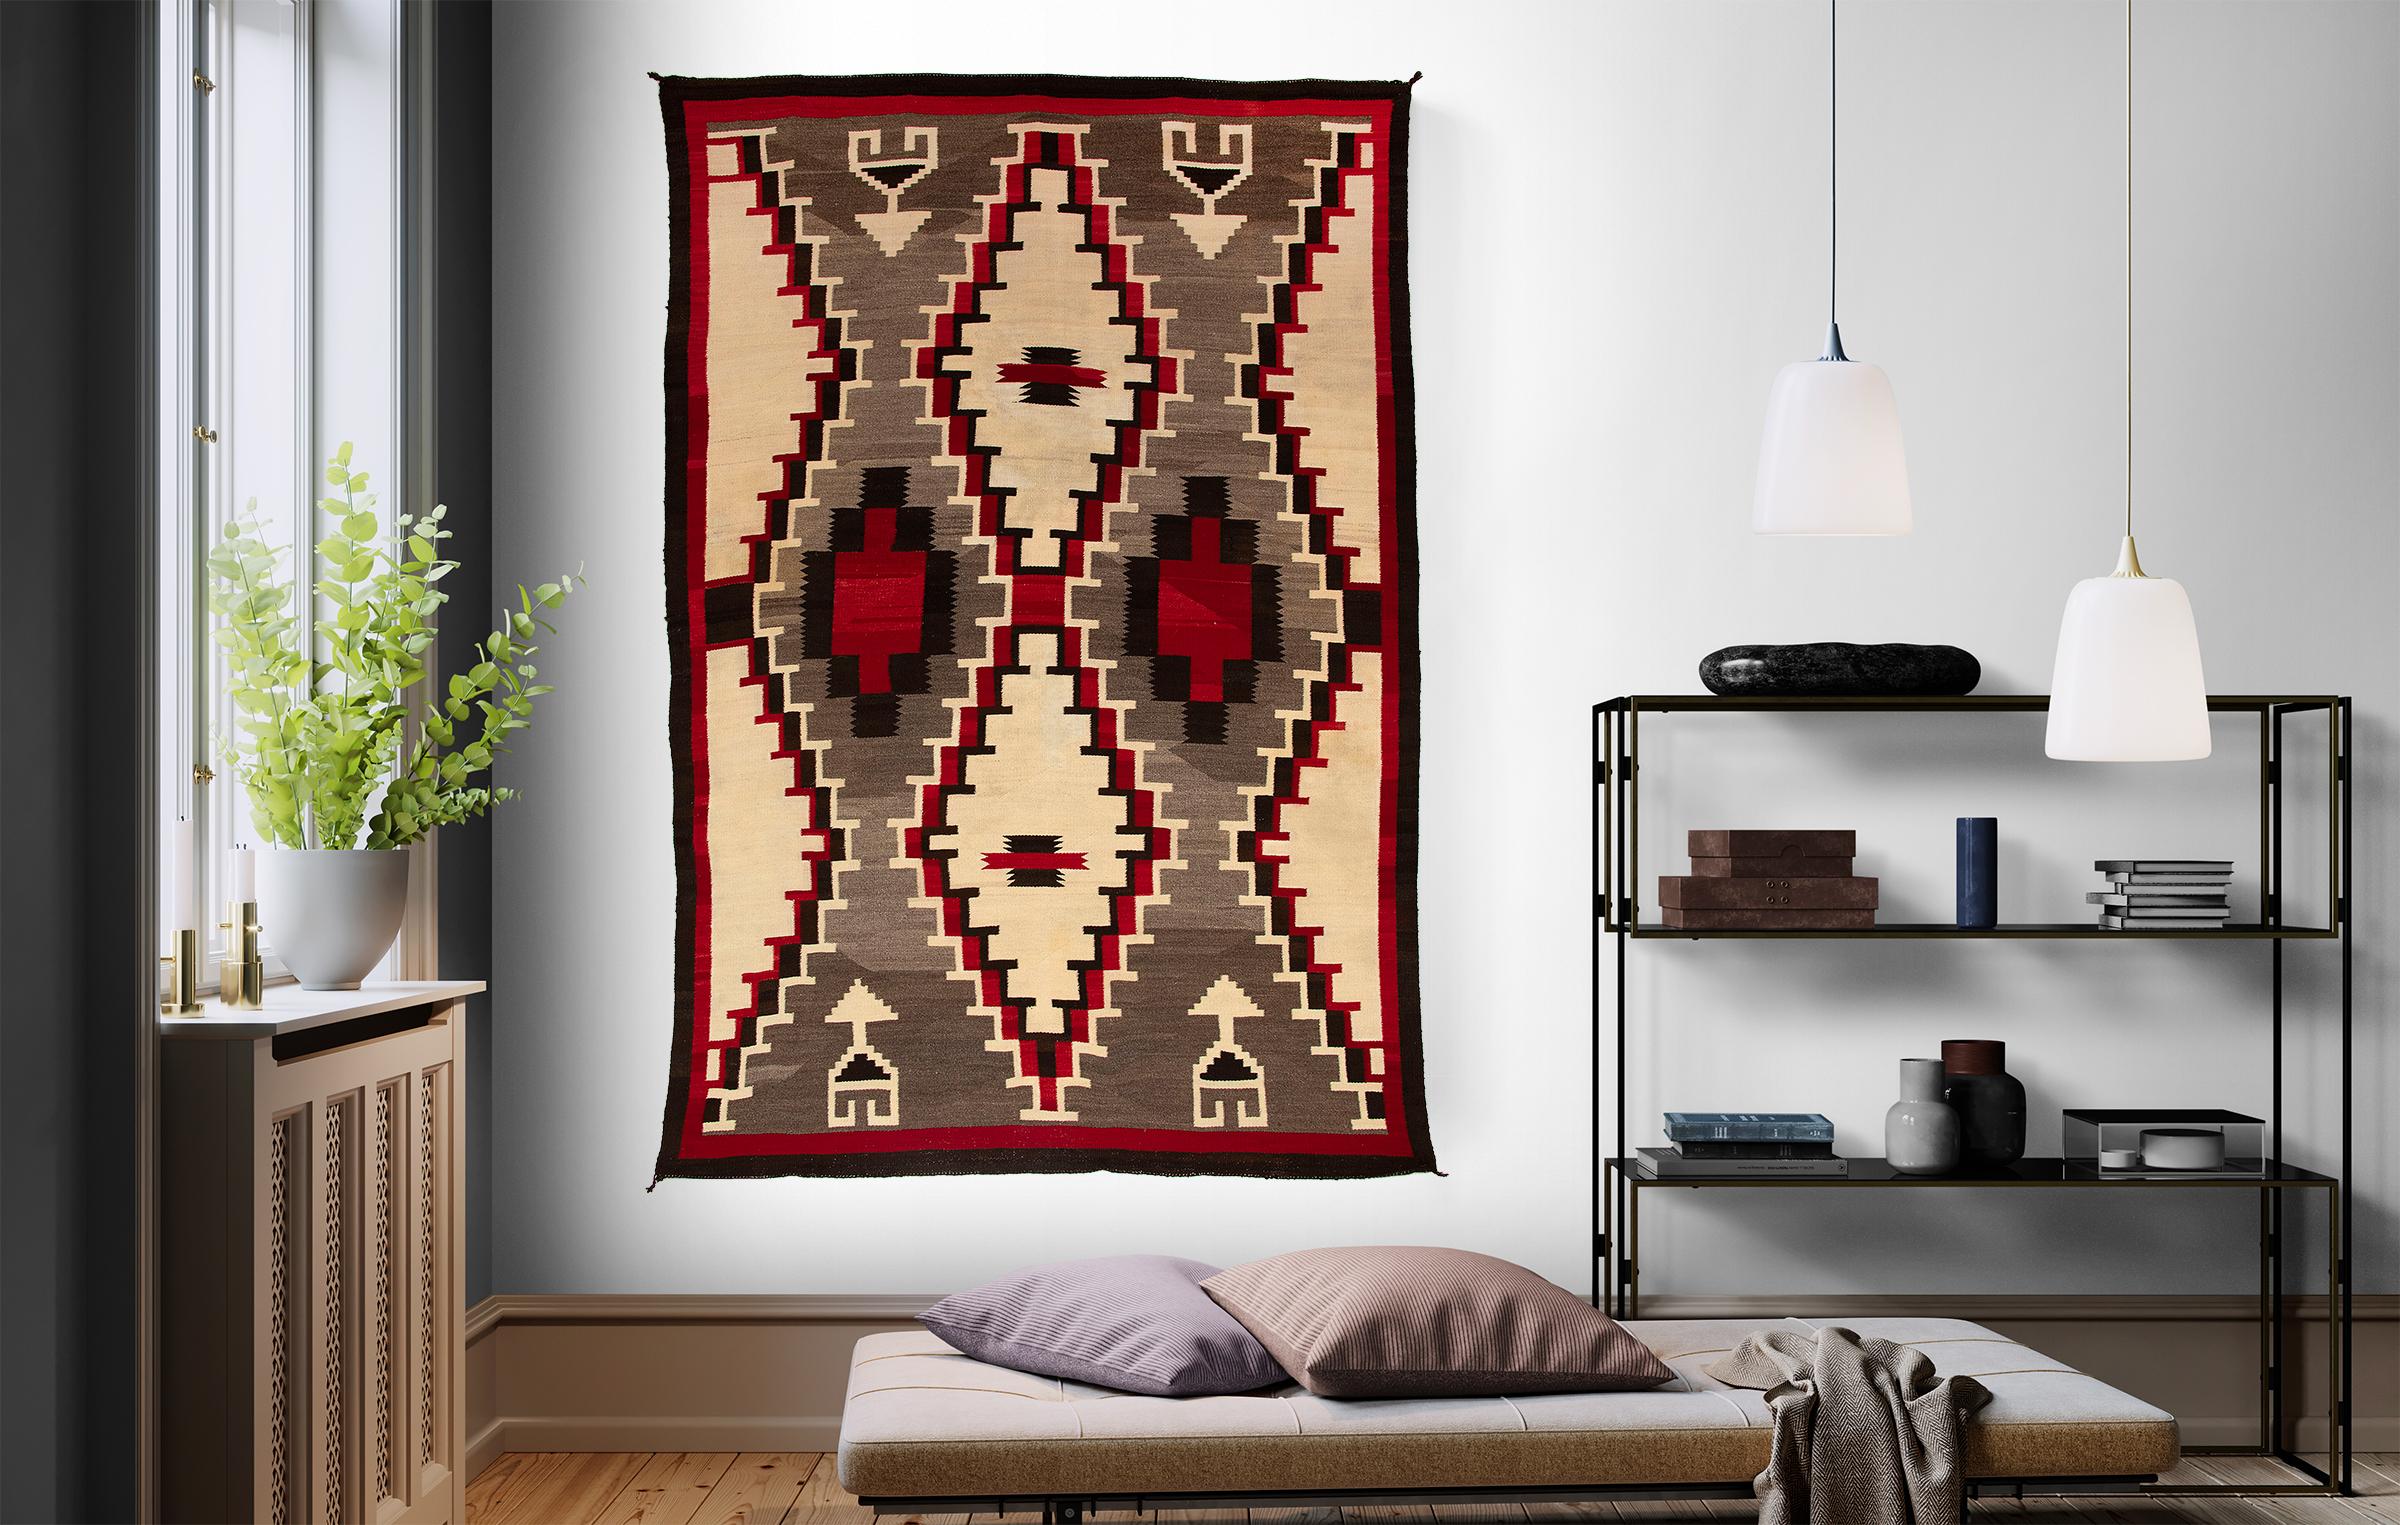 Vintage Navajo Area Rug, Hubbell Trading Post, Ganado design with hourglass, arrow and diamond elements. Woven of native hand-spun wool in natural fleece colors of brown/black, ivory (white), gray/brown with aniline dyed red.  The Hubbell Trading